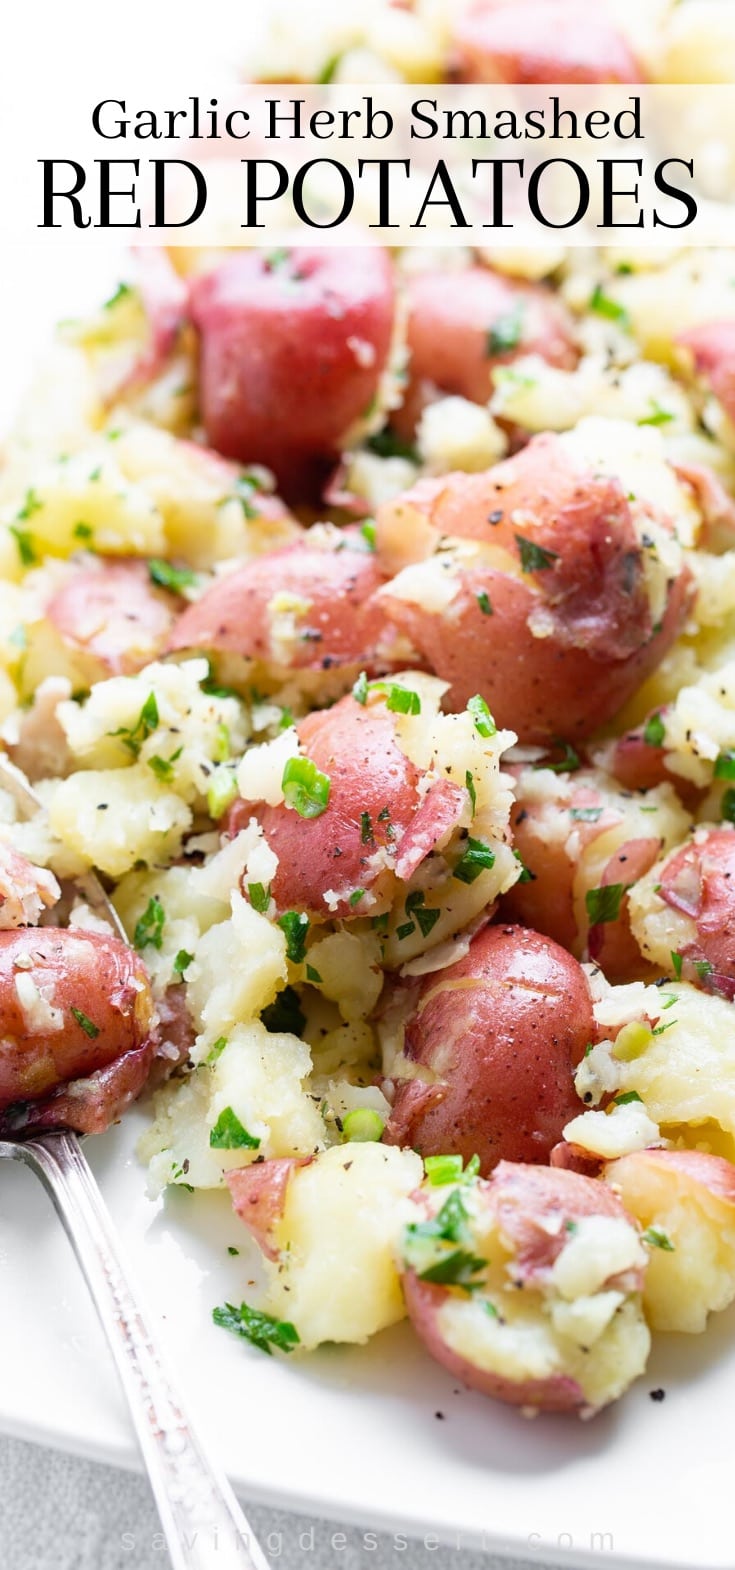 A plate of smashed red potatoes topped with herbs and green onions